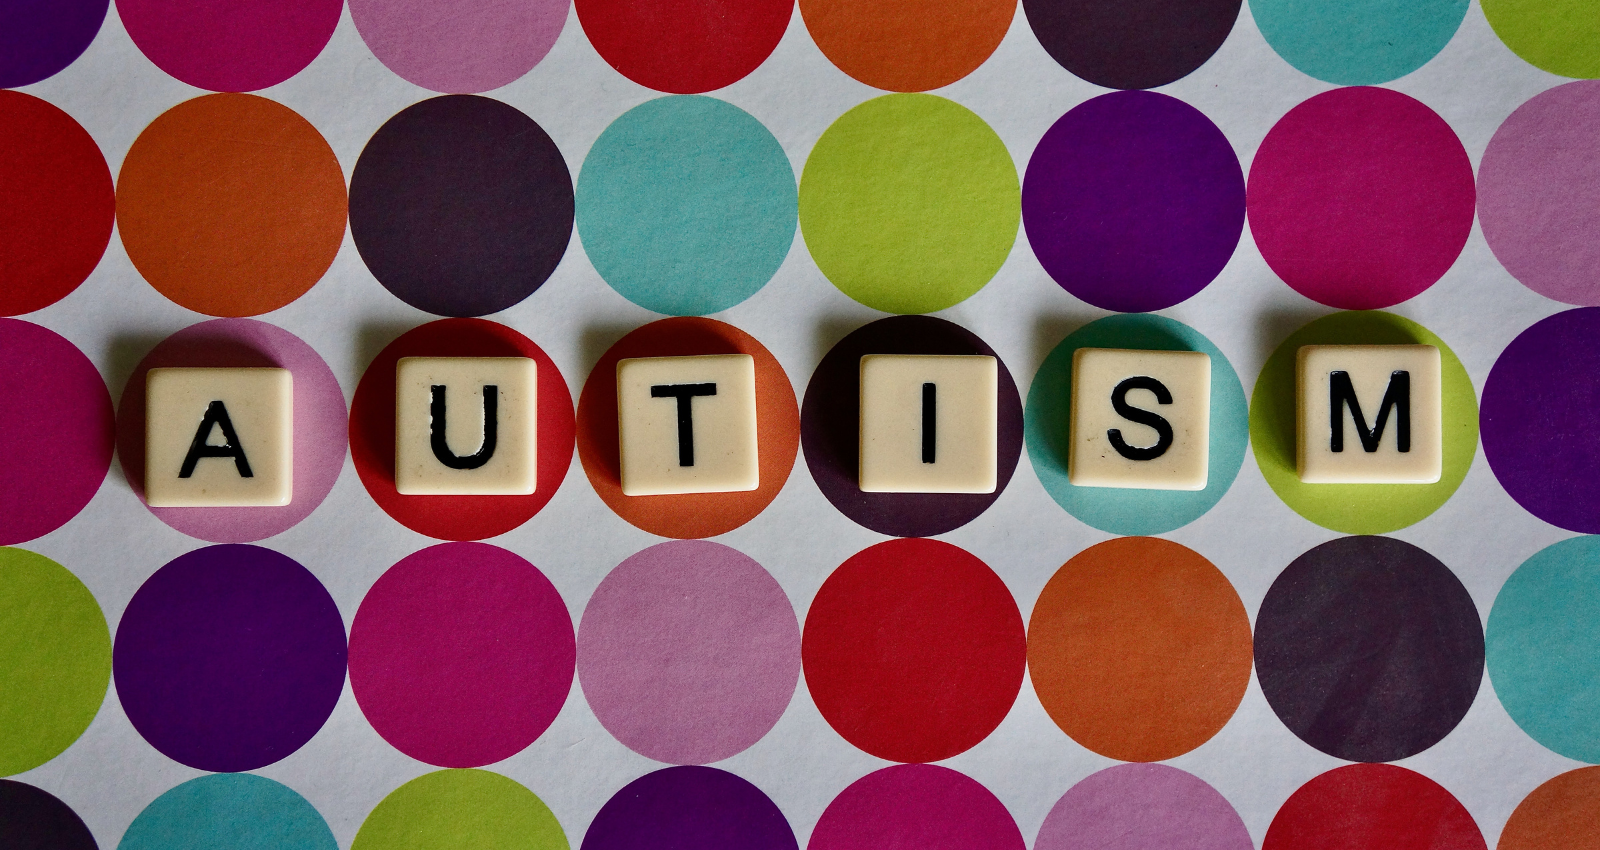 Scrabble pieces spelling out the word Autism